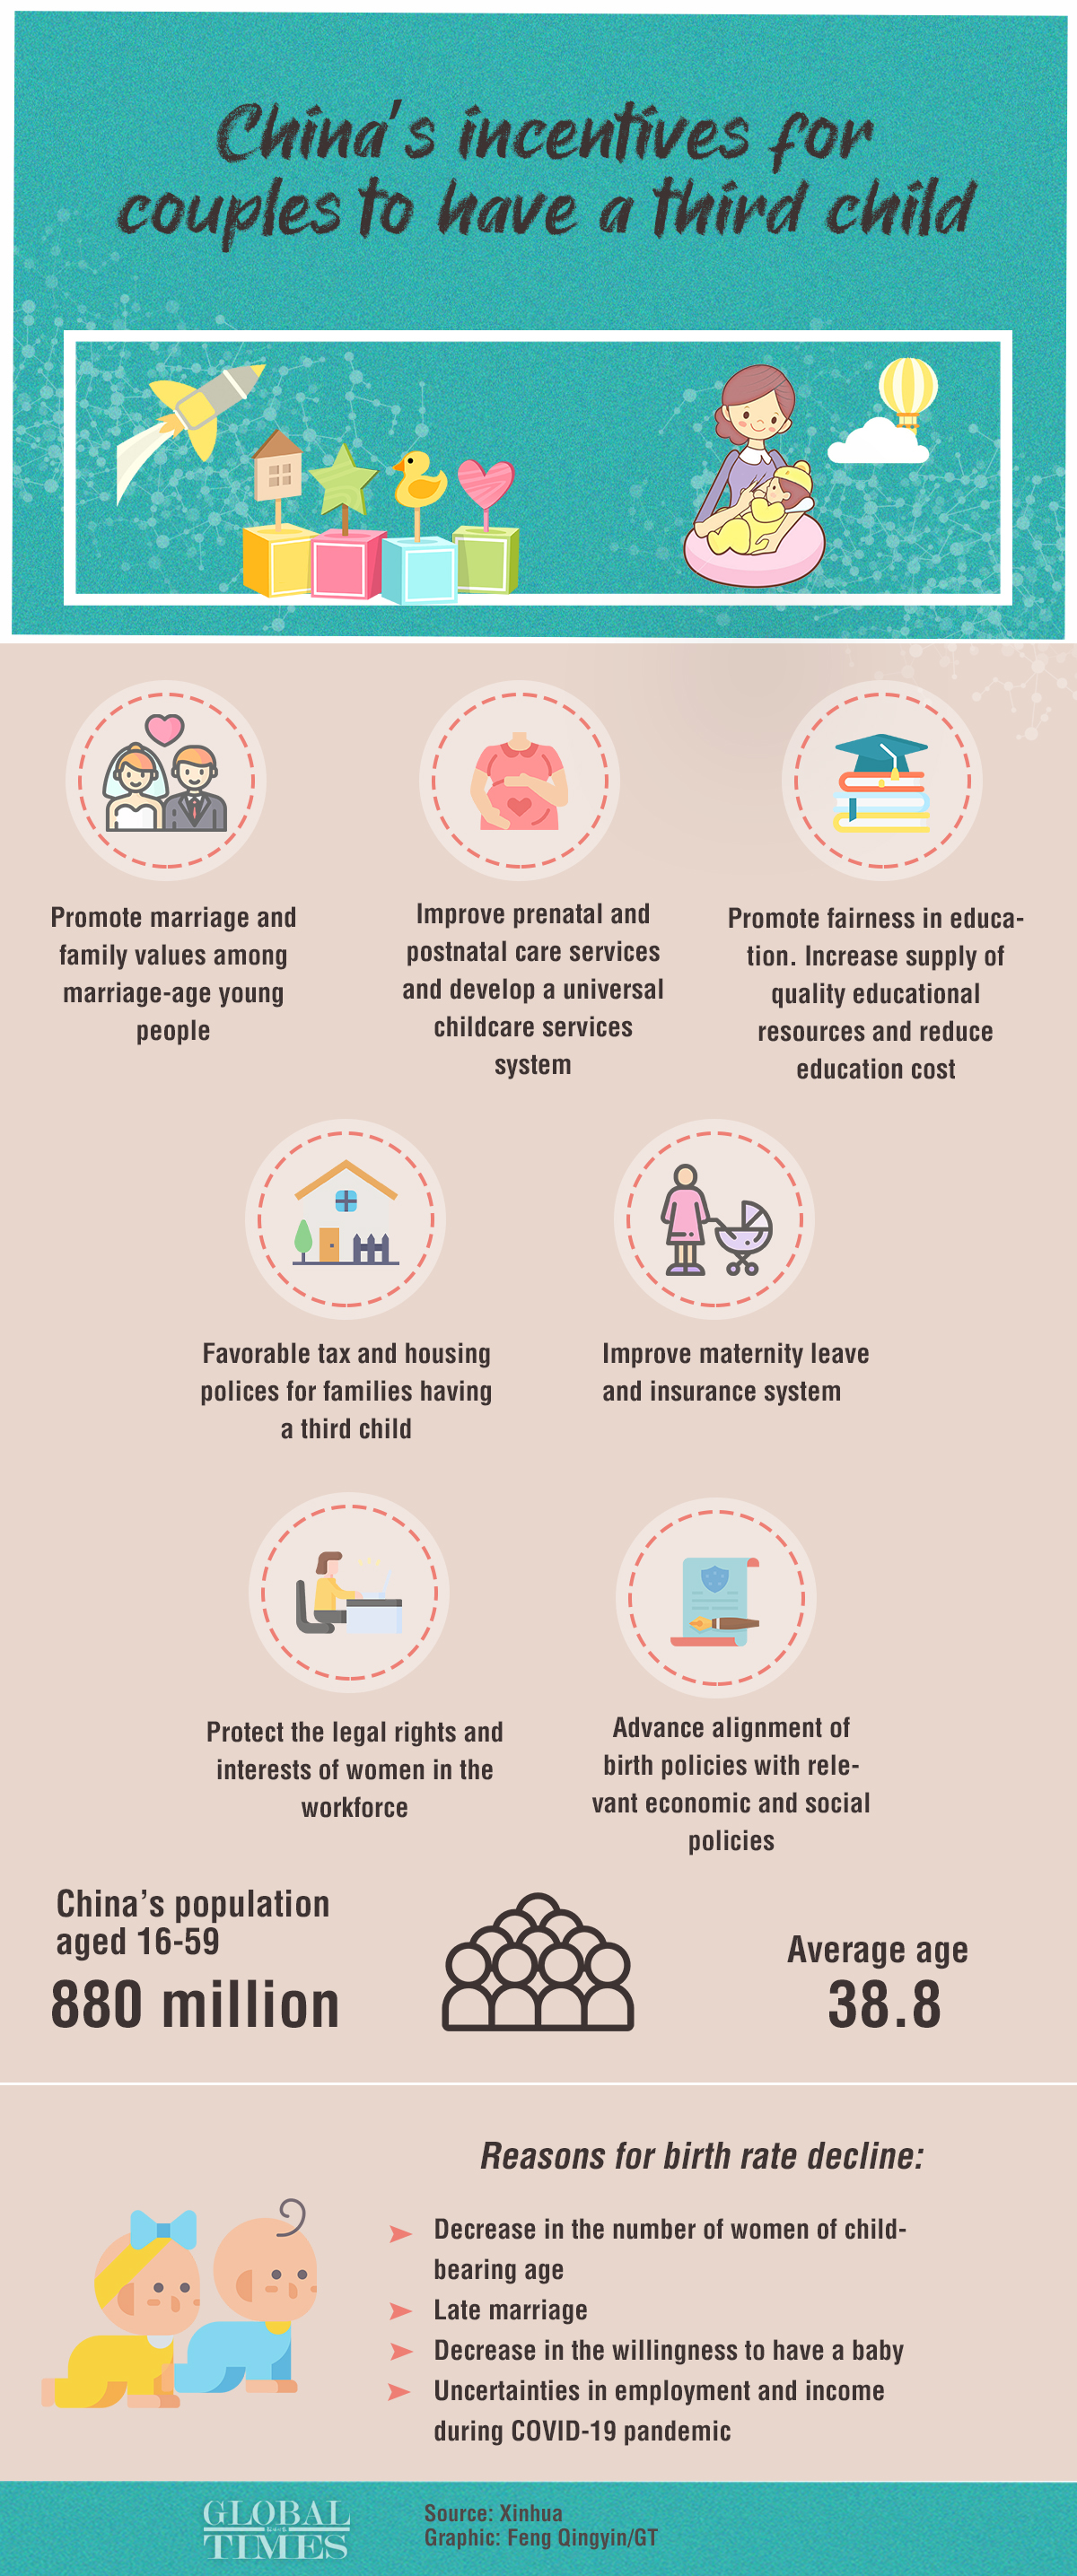 China on Monday announced it was adjusting its family planning policy to allow each couple to have up to three children, a major shift from the current two-child policy. What incentives will China give for couples to have a third child? Graphic: Feng Qingyin/GT